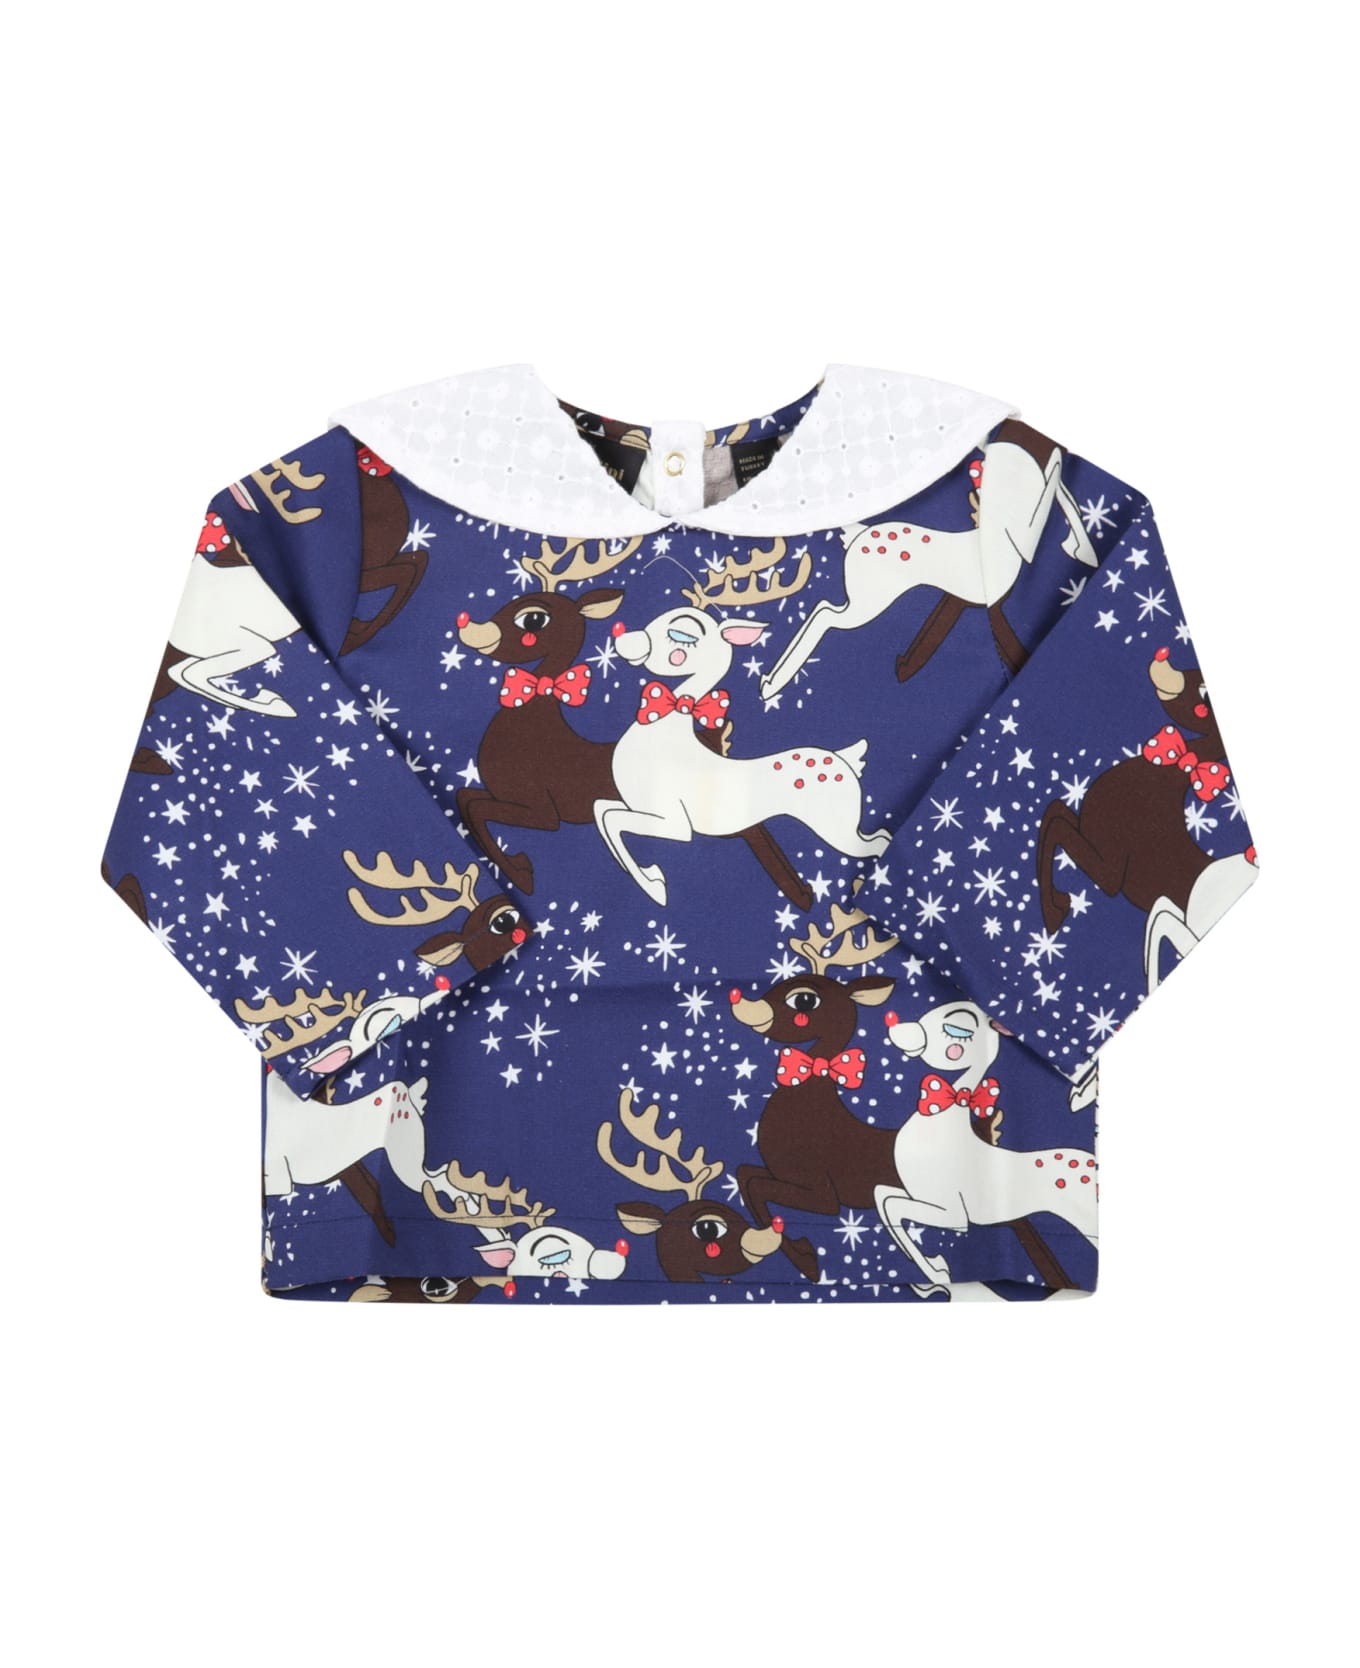 Mini Rodini Blue Blouse For Baby Girl With Reindeer And Stars - Blue